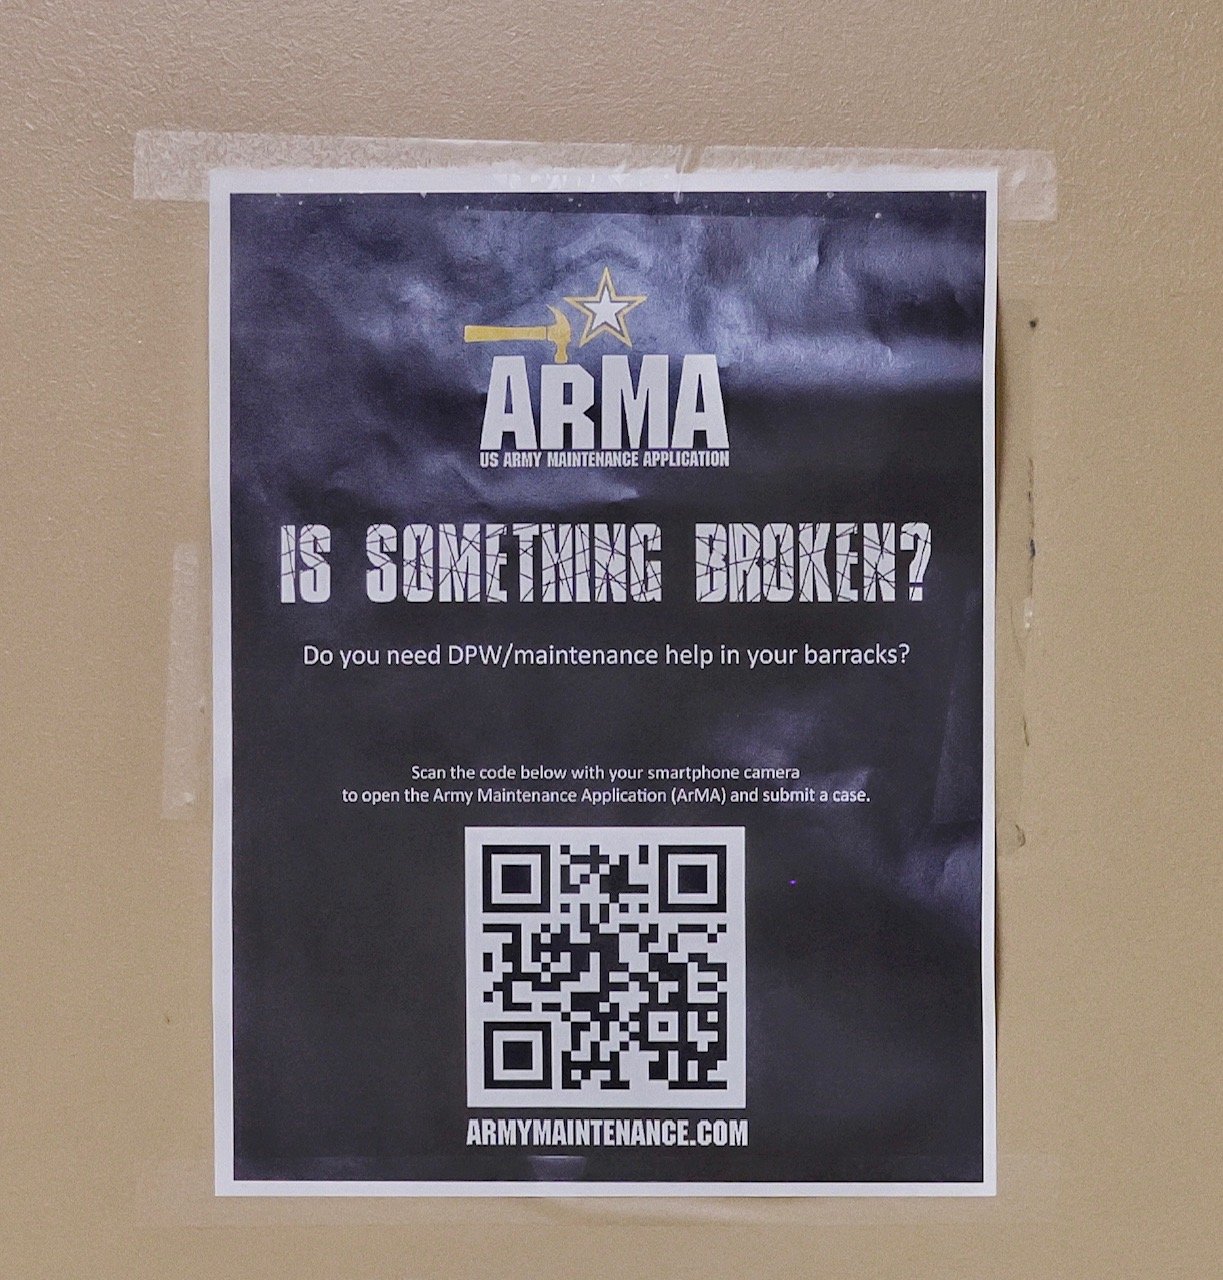 A poster urges soldiers to report issues with their living quarters. The poster includes a QR code that allows a soldier to scan the poster with a smartphone to connect and report the issue.